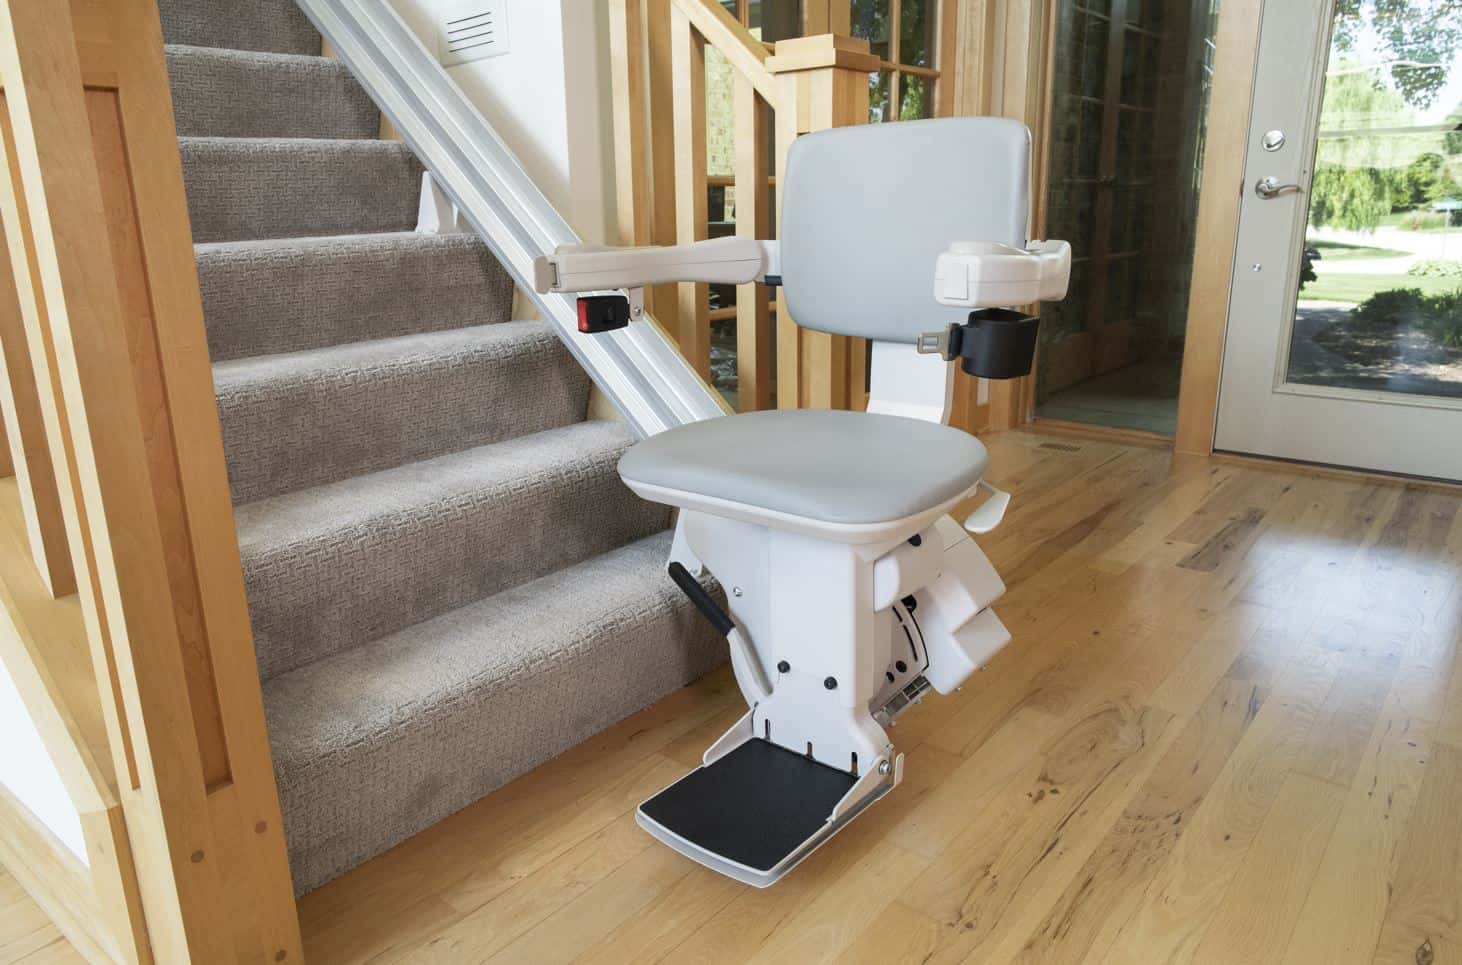 Stair Lift Pricing In 2022 How Much Does A Stair Lift Cost 2022